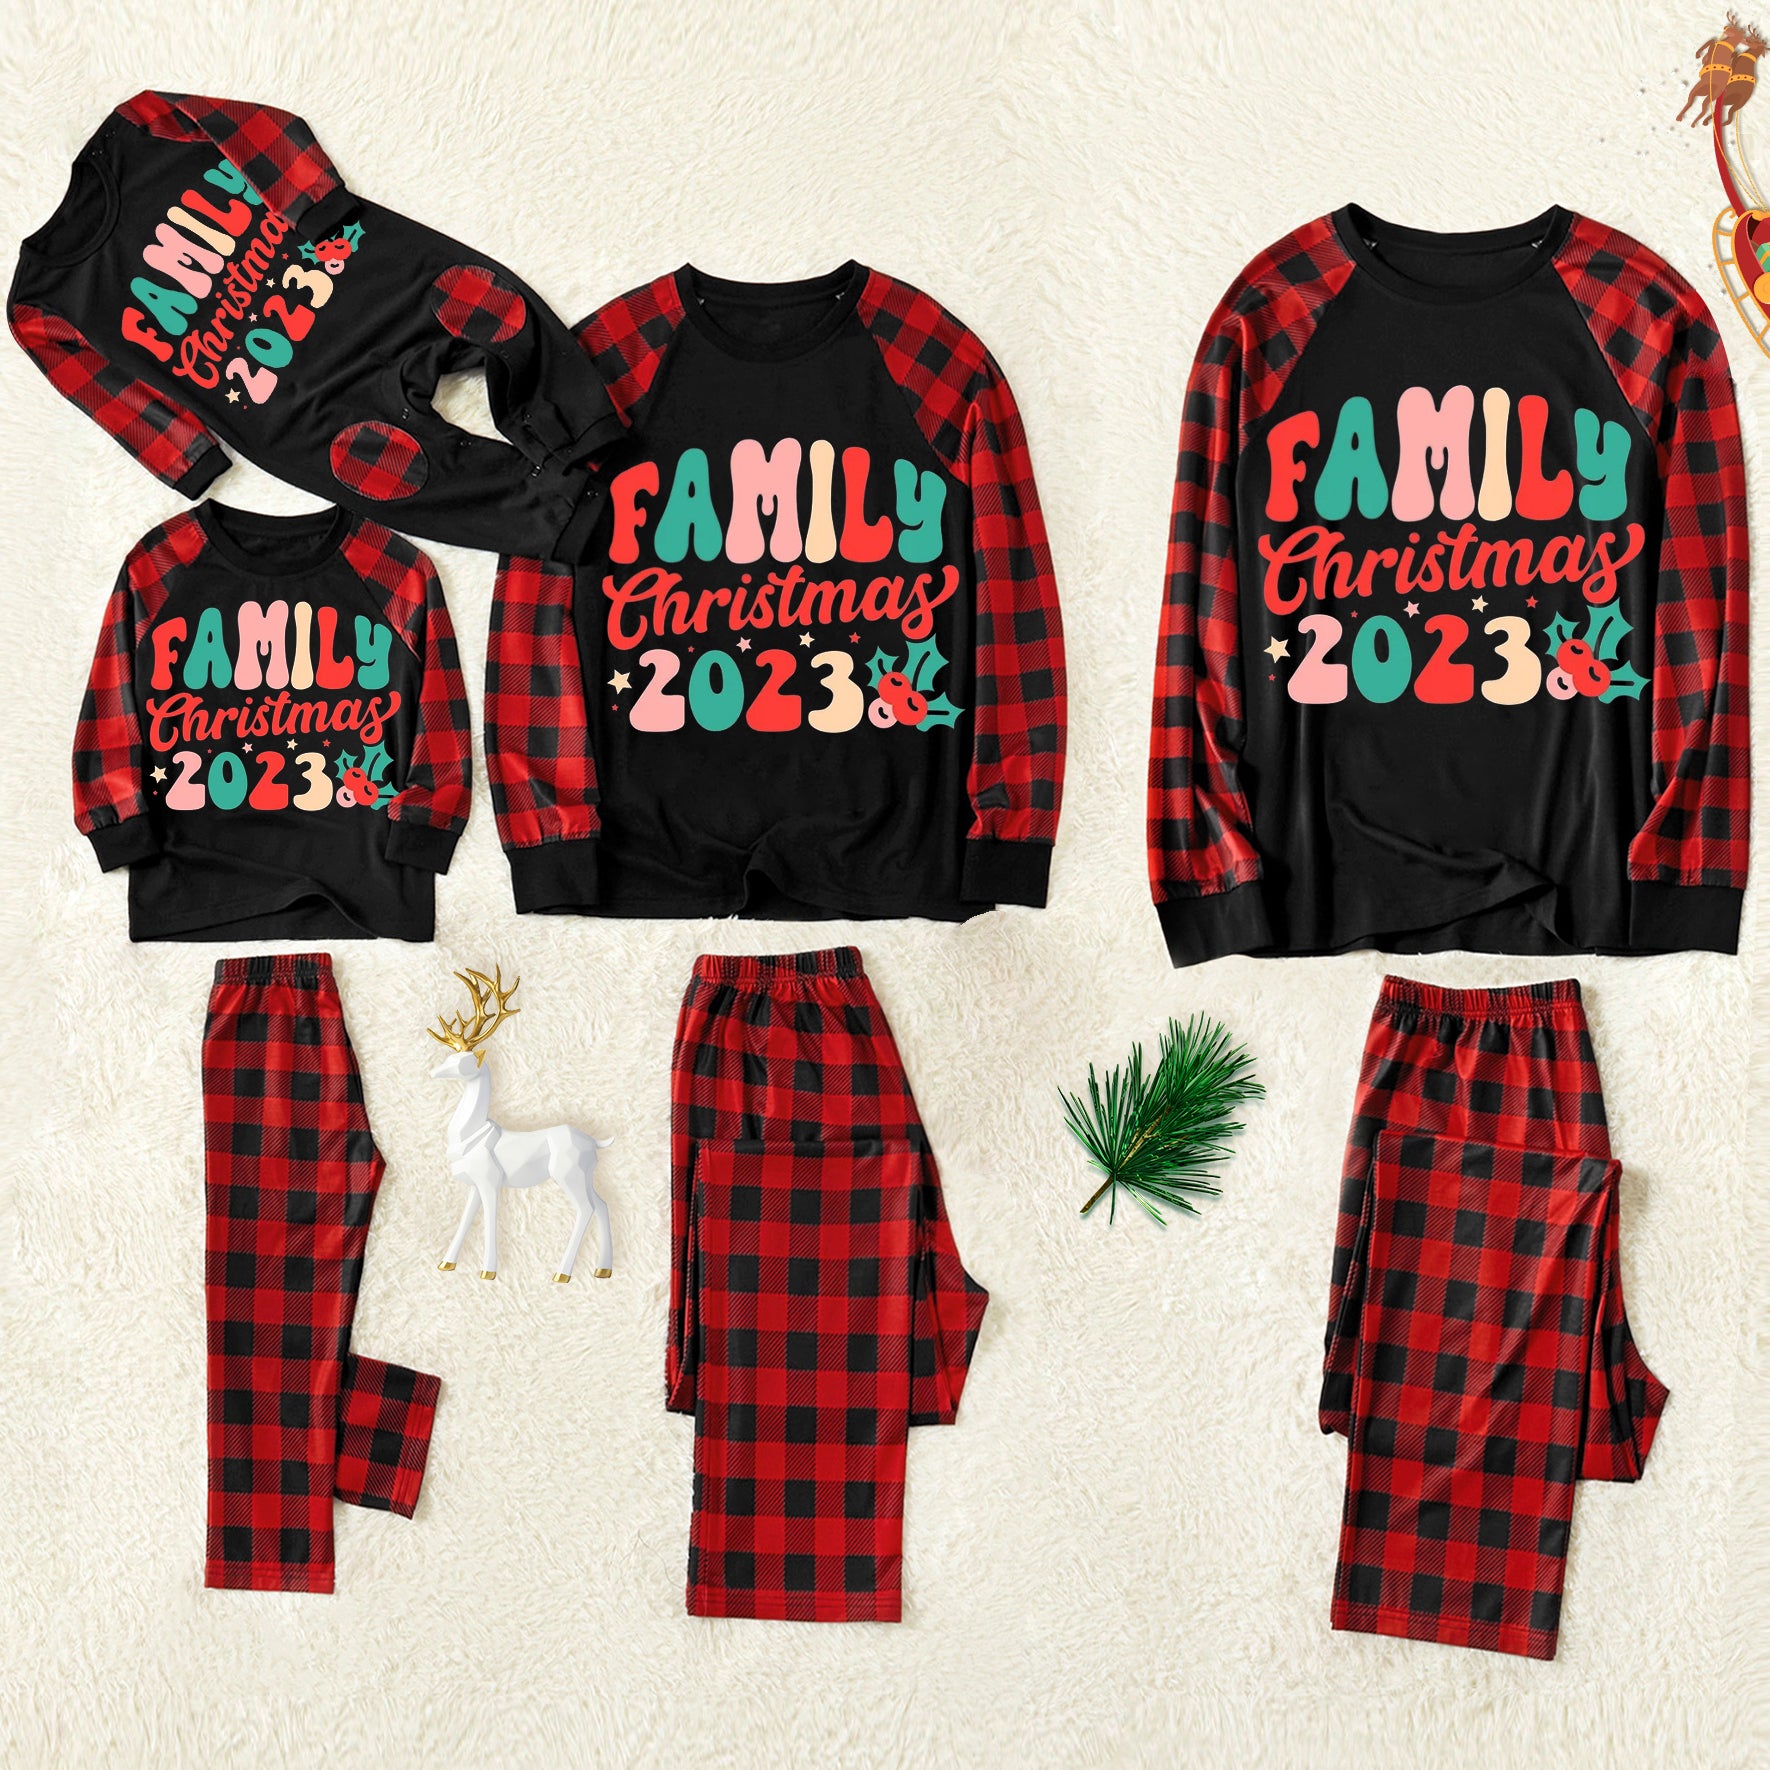 Christmas ‘ Family Christmas 2023’ Letter Print Patterned Contrast Black top and Black & Red Plaid Pants Family Matching Pajamas Set